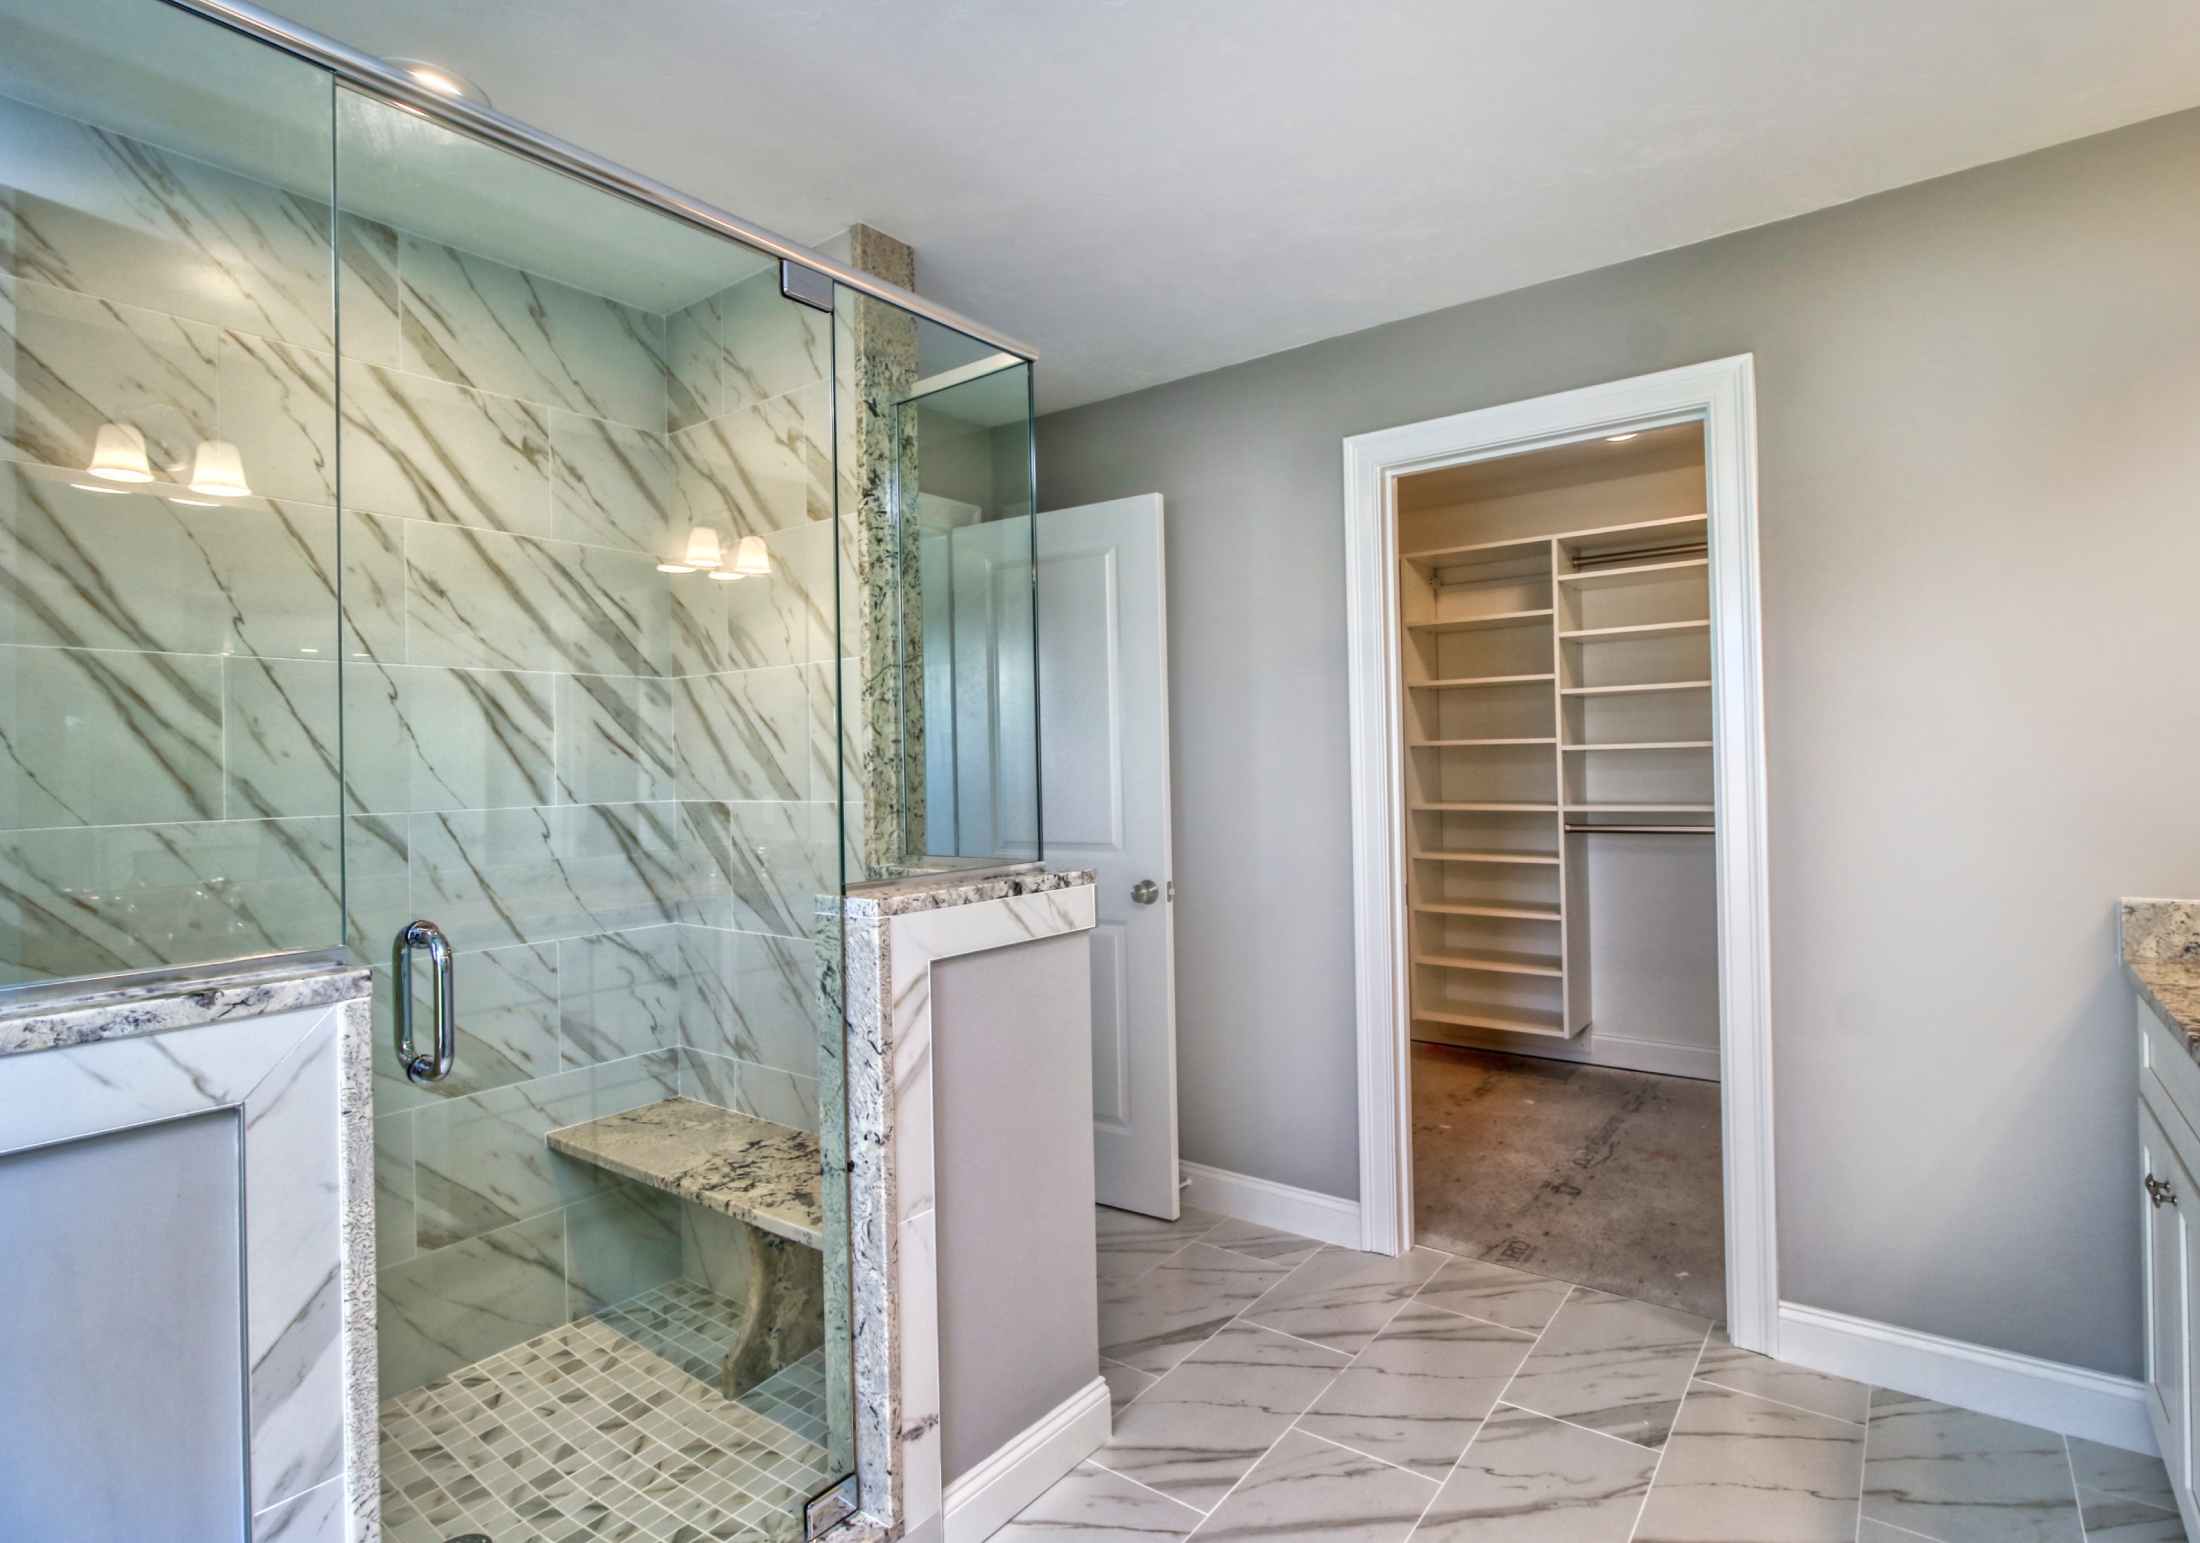 Paste grey bathroom with white accents and glass shower door and walls